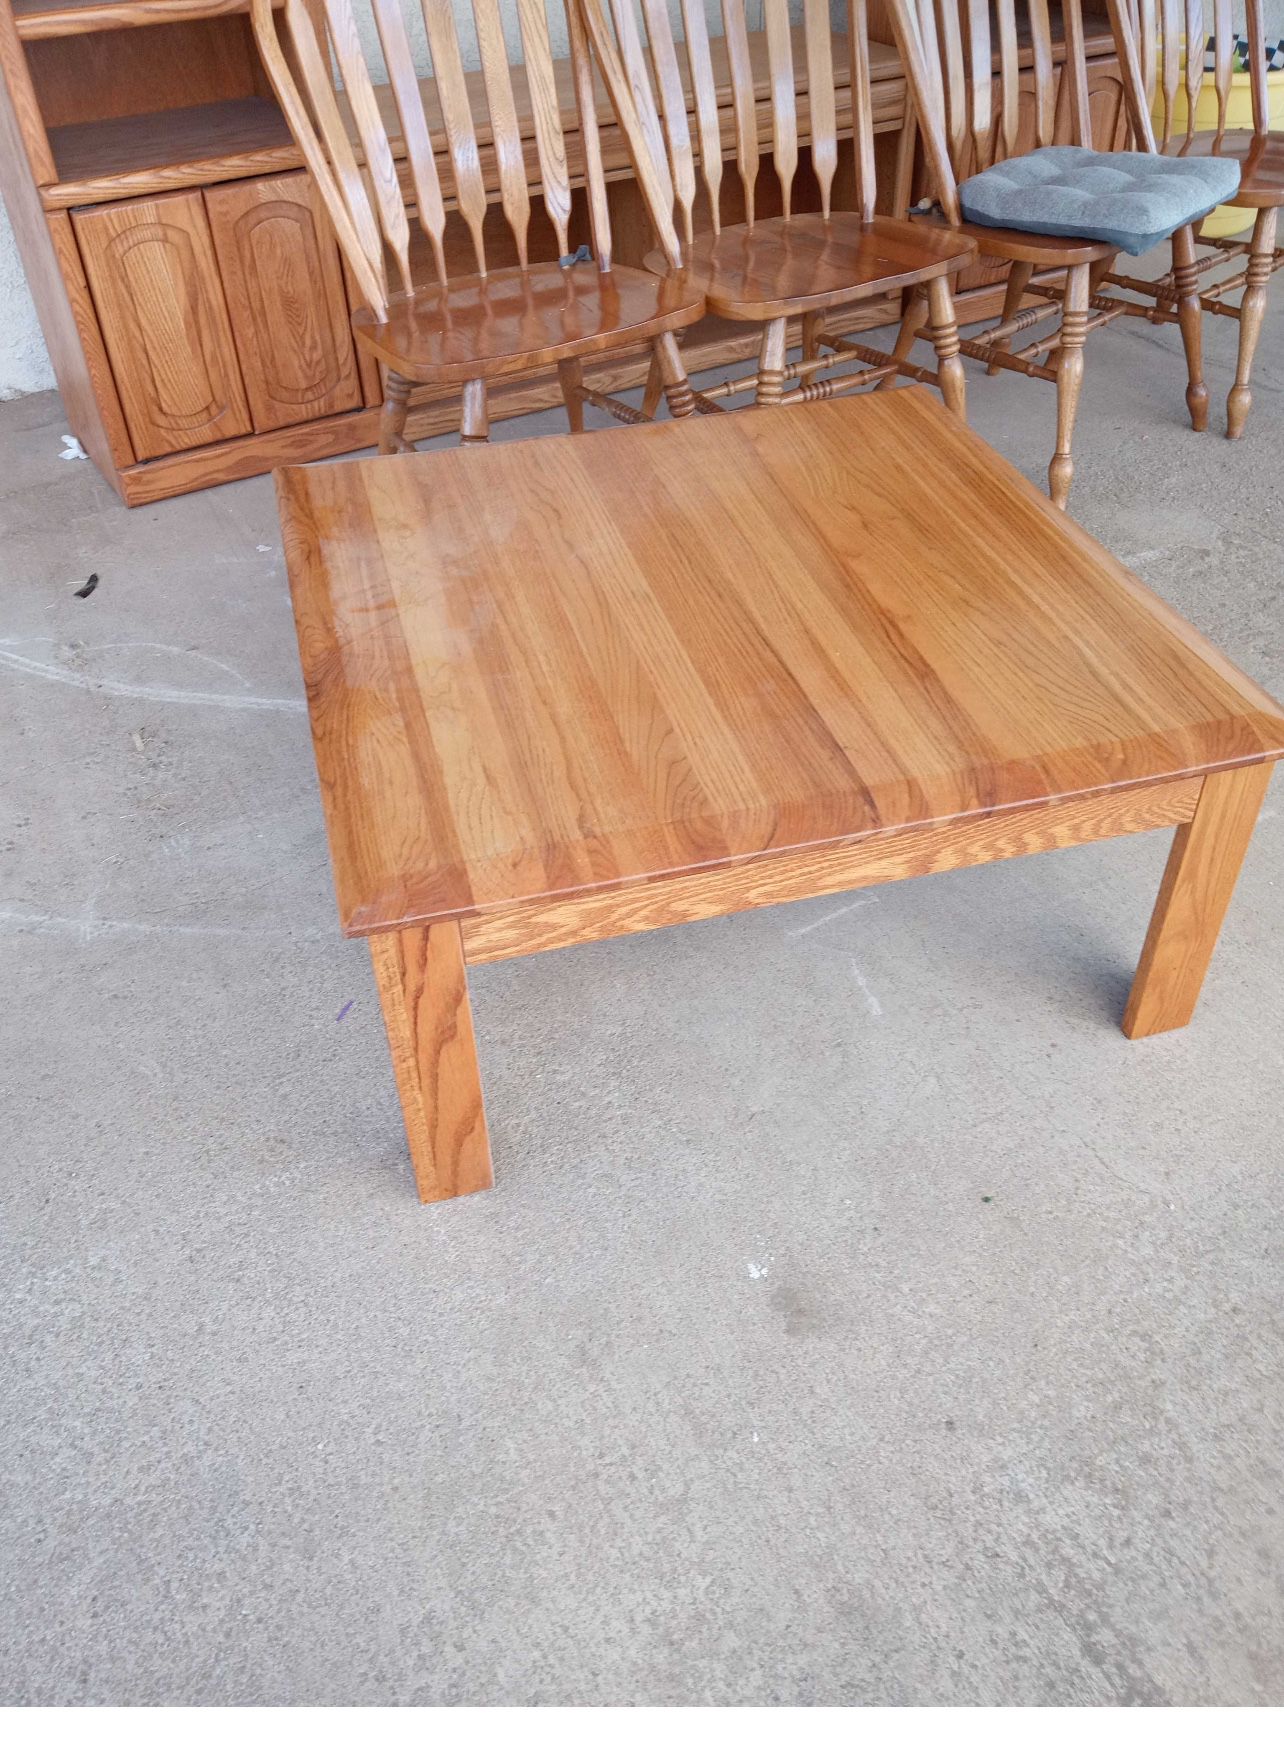 Wooden Table For Sale! 